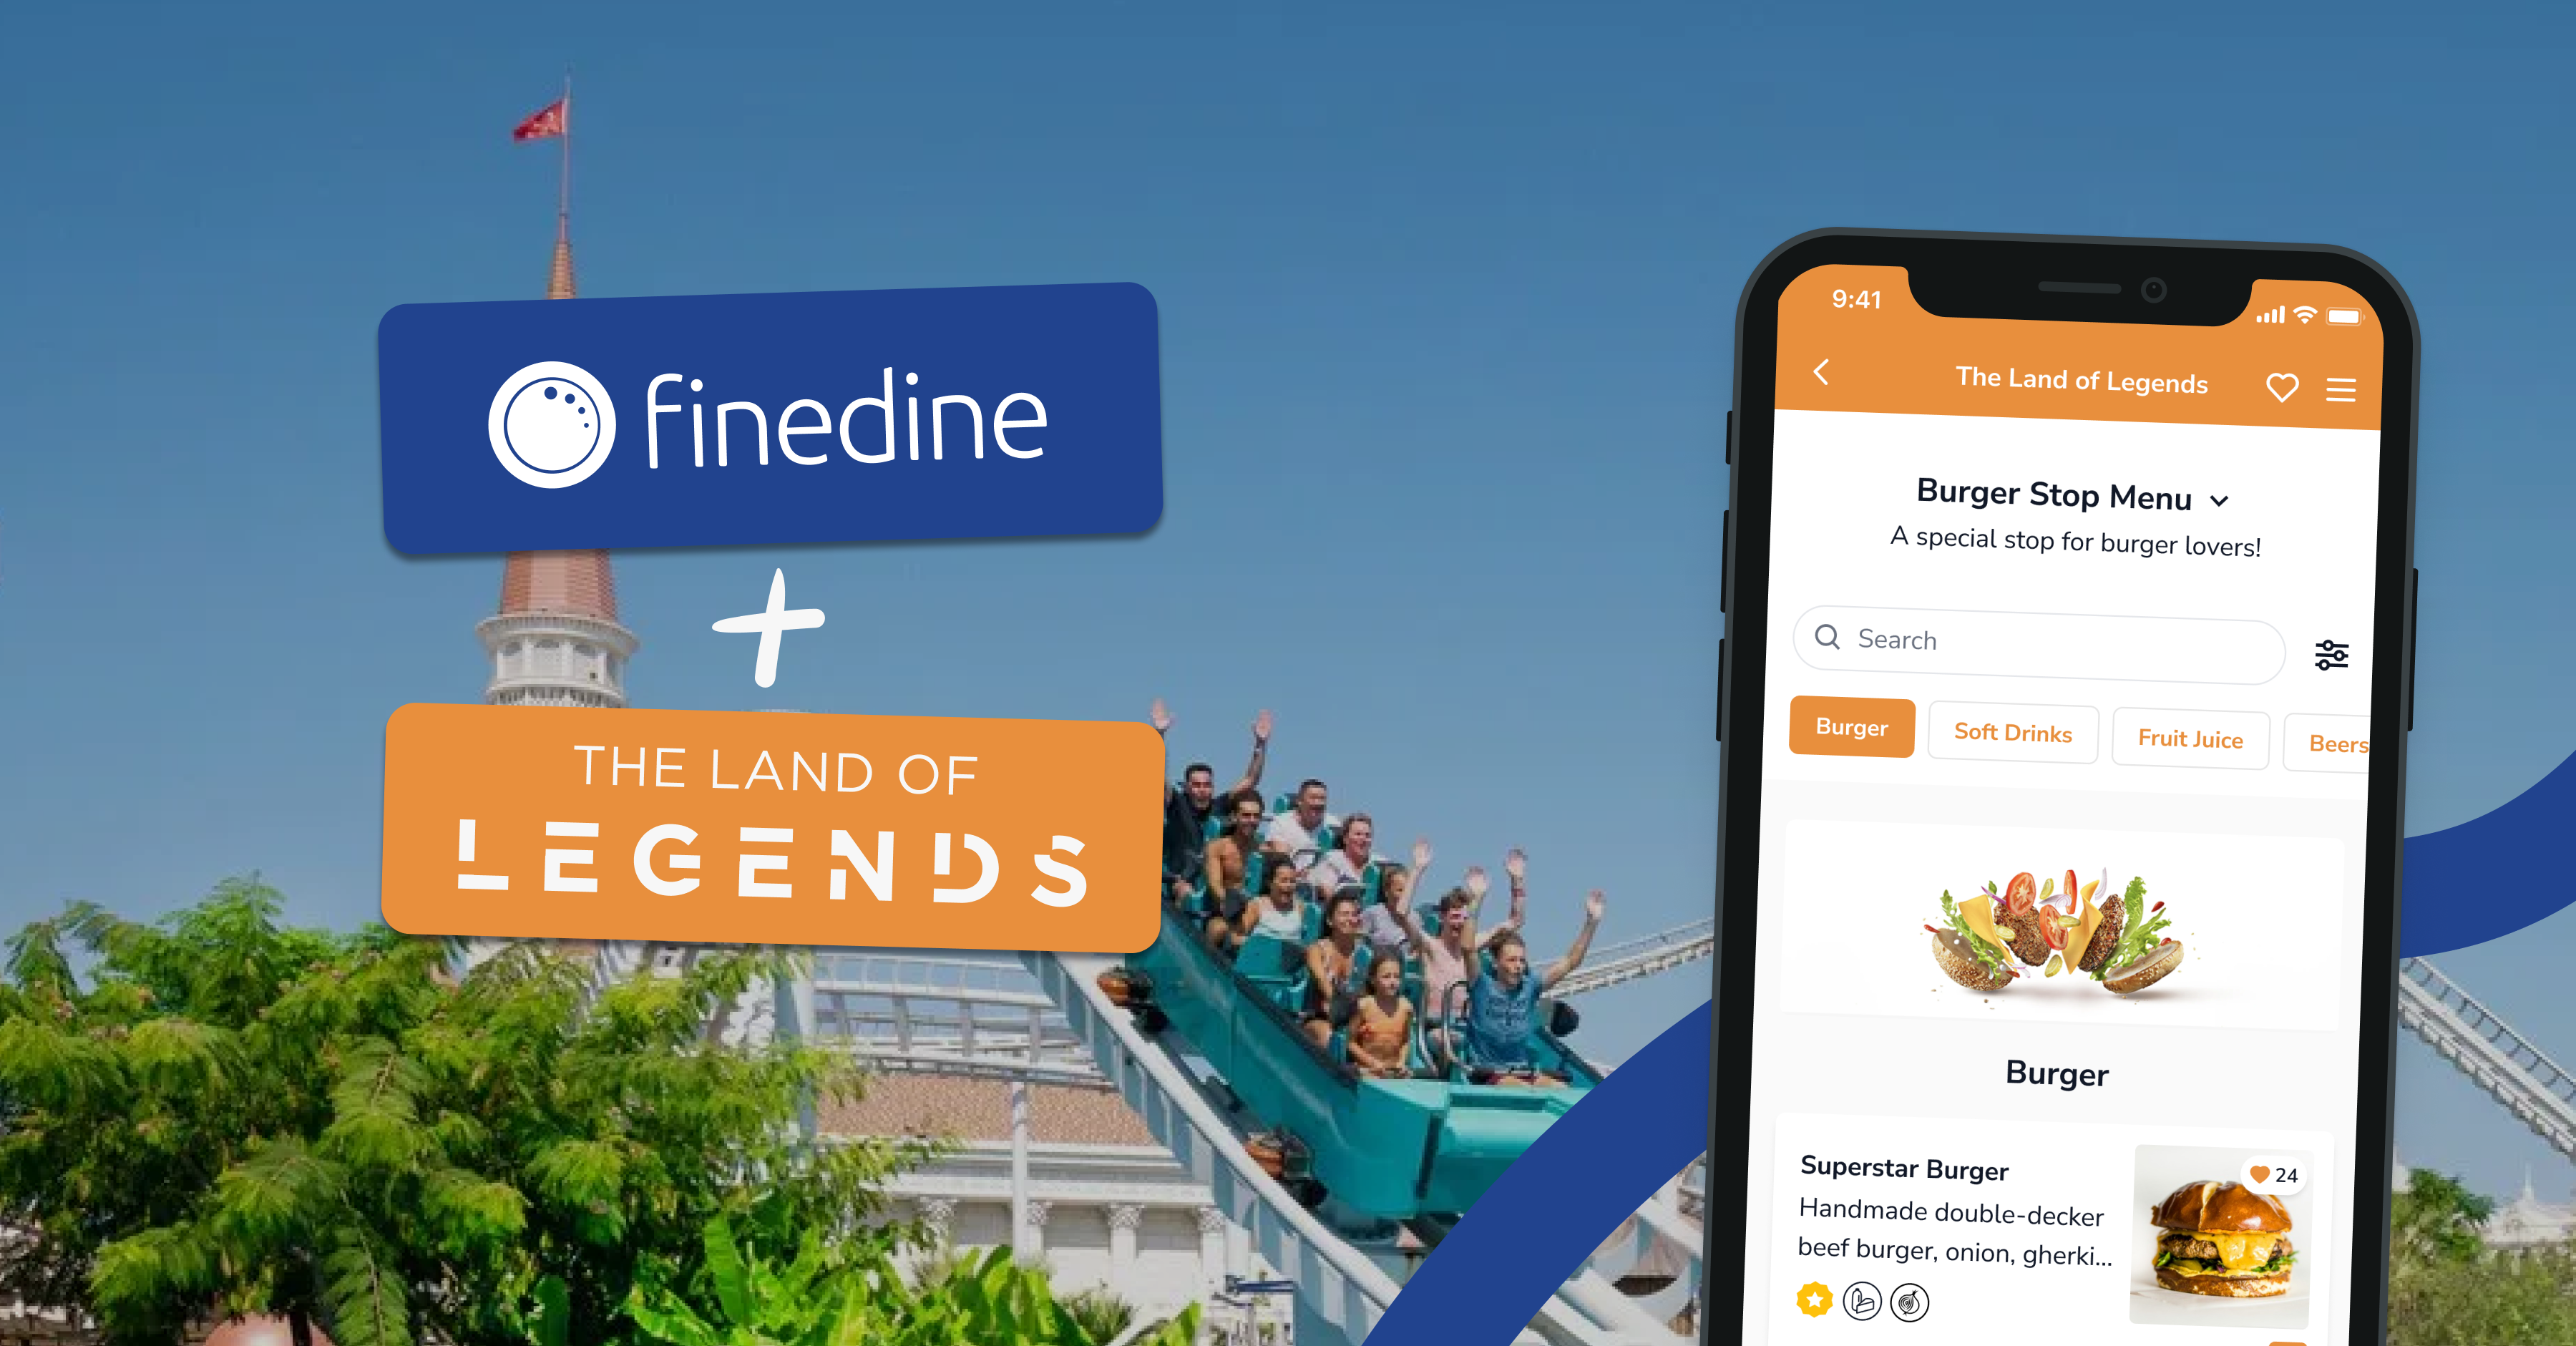 FineDine Partners with Land of Legends